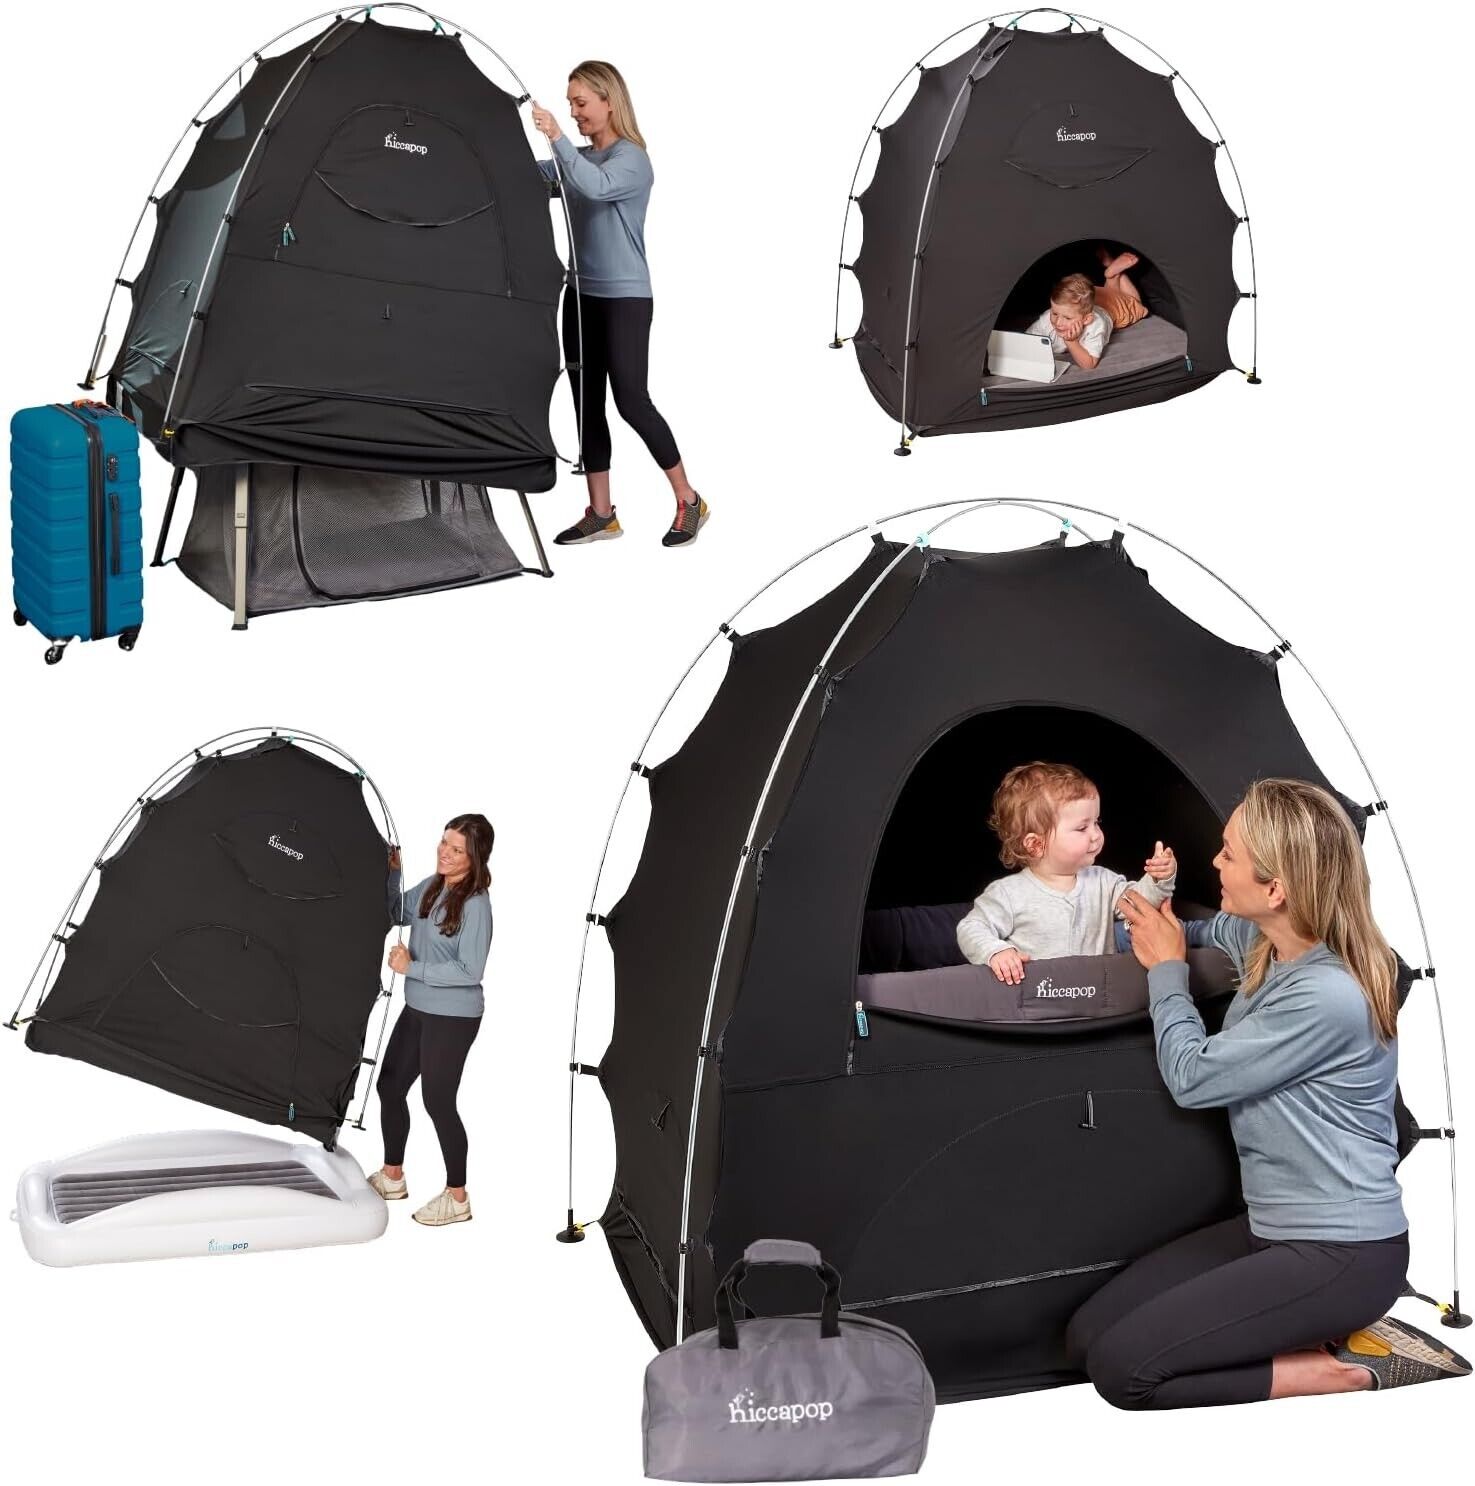 Blackout Tent for Pack and Play, Baby Sleep Pod, Baby Crib Tent, Blackout Canopy